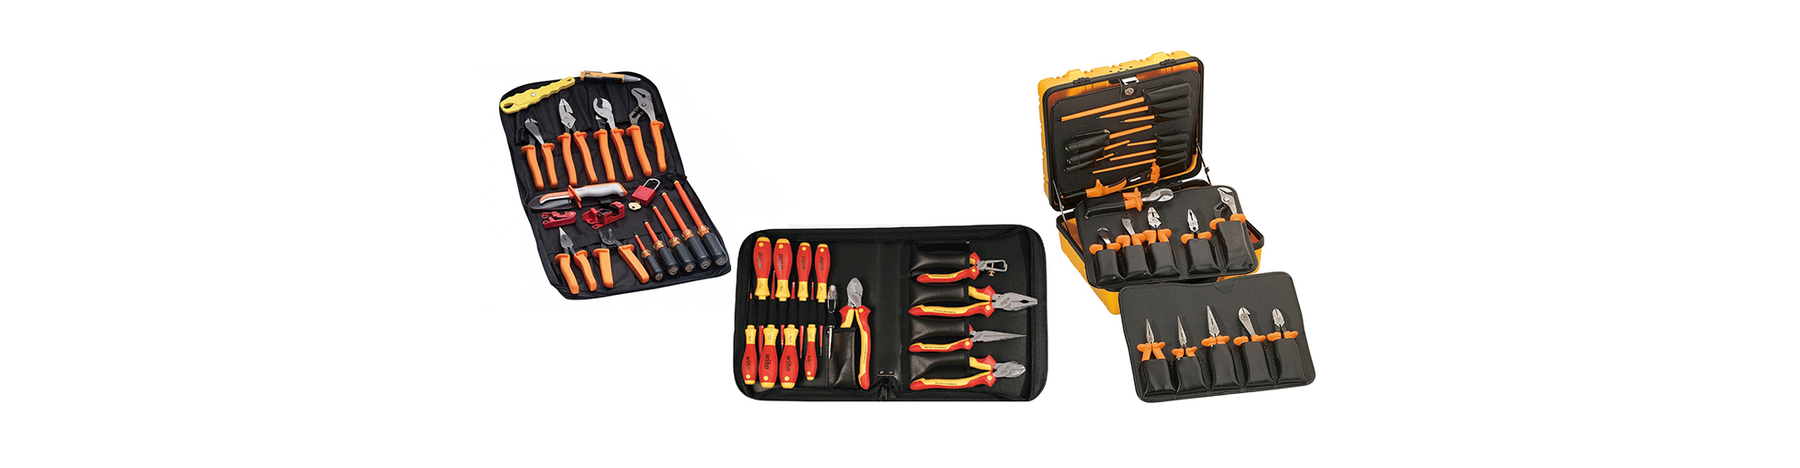 Hot Deals on Insulated Tools